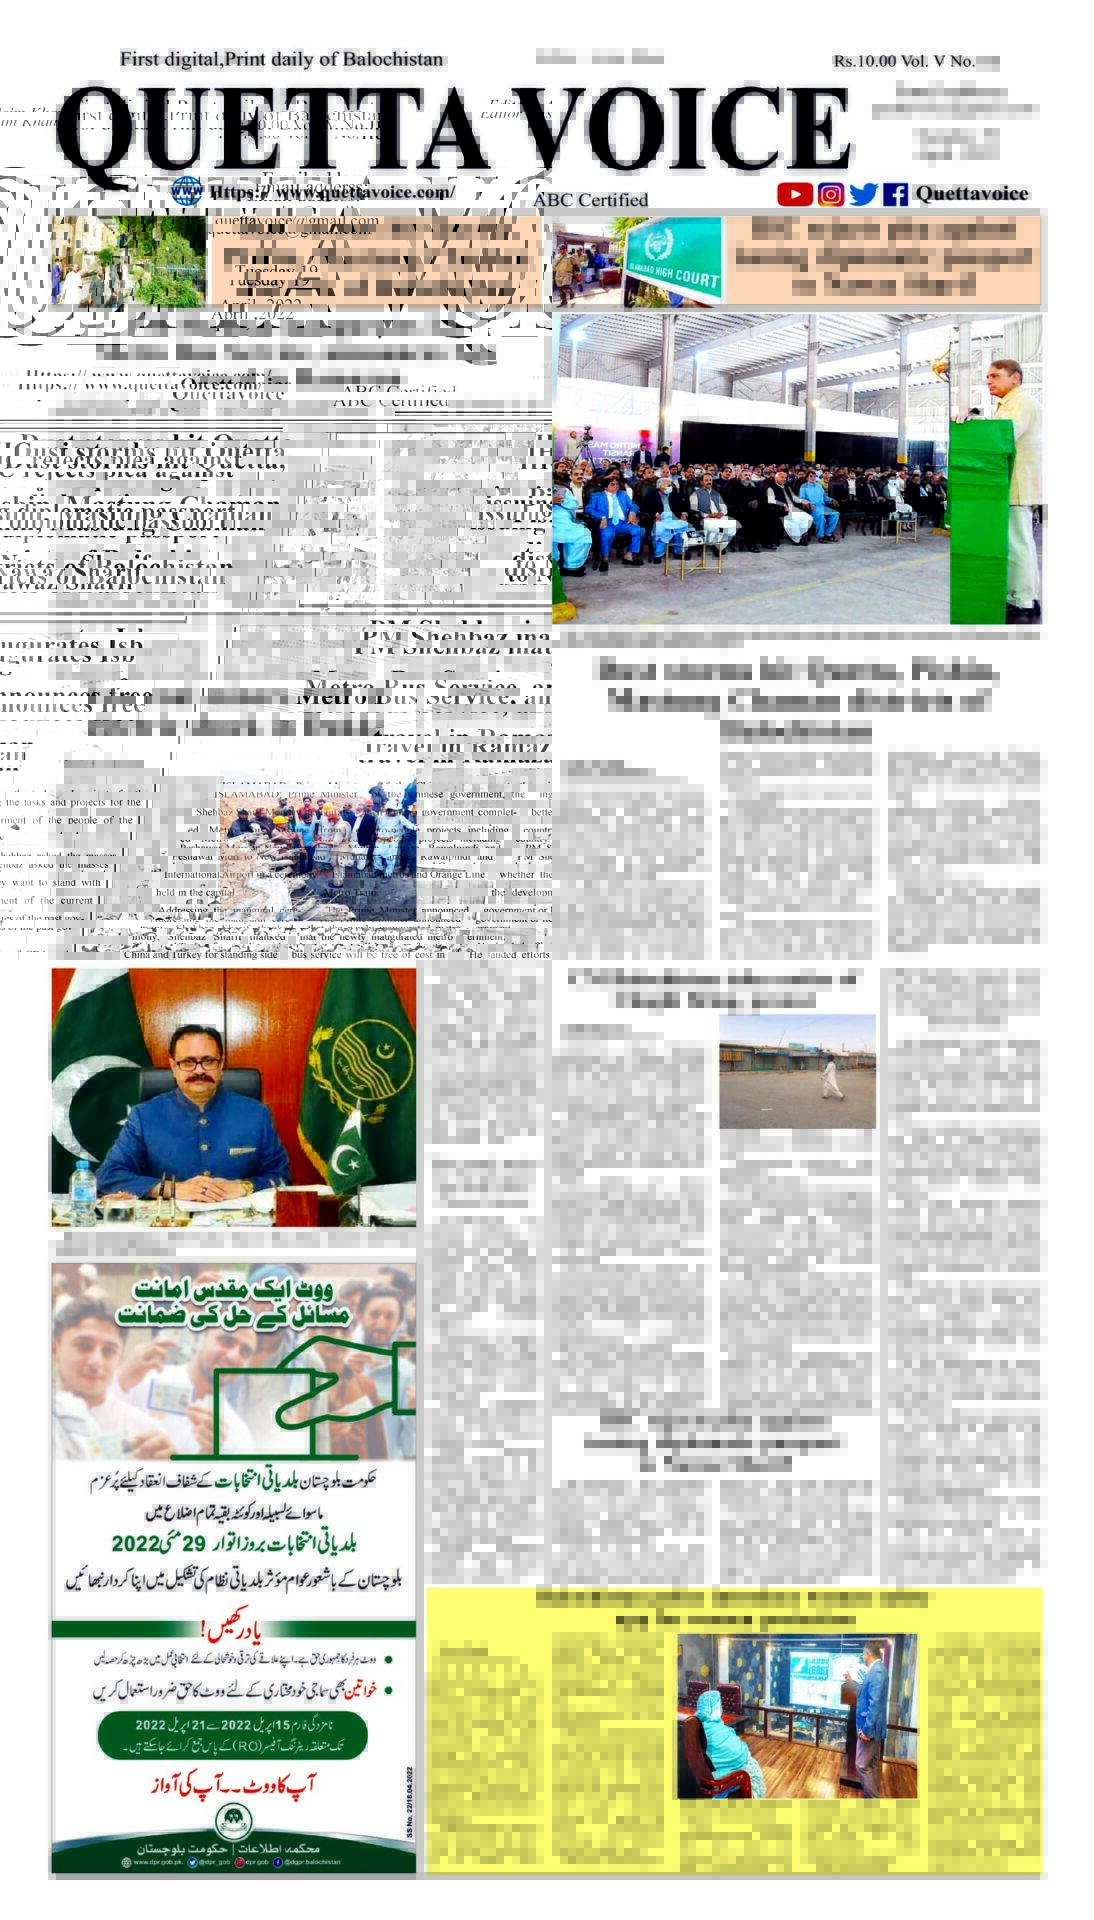 Today's Quetta Voice Newspaper, Tuesday, April 19, 2022